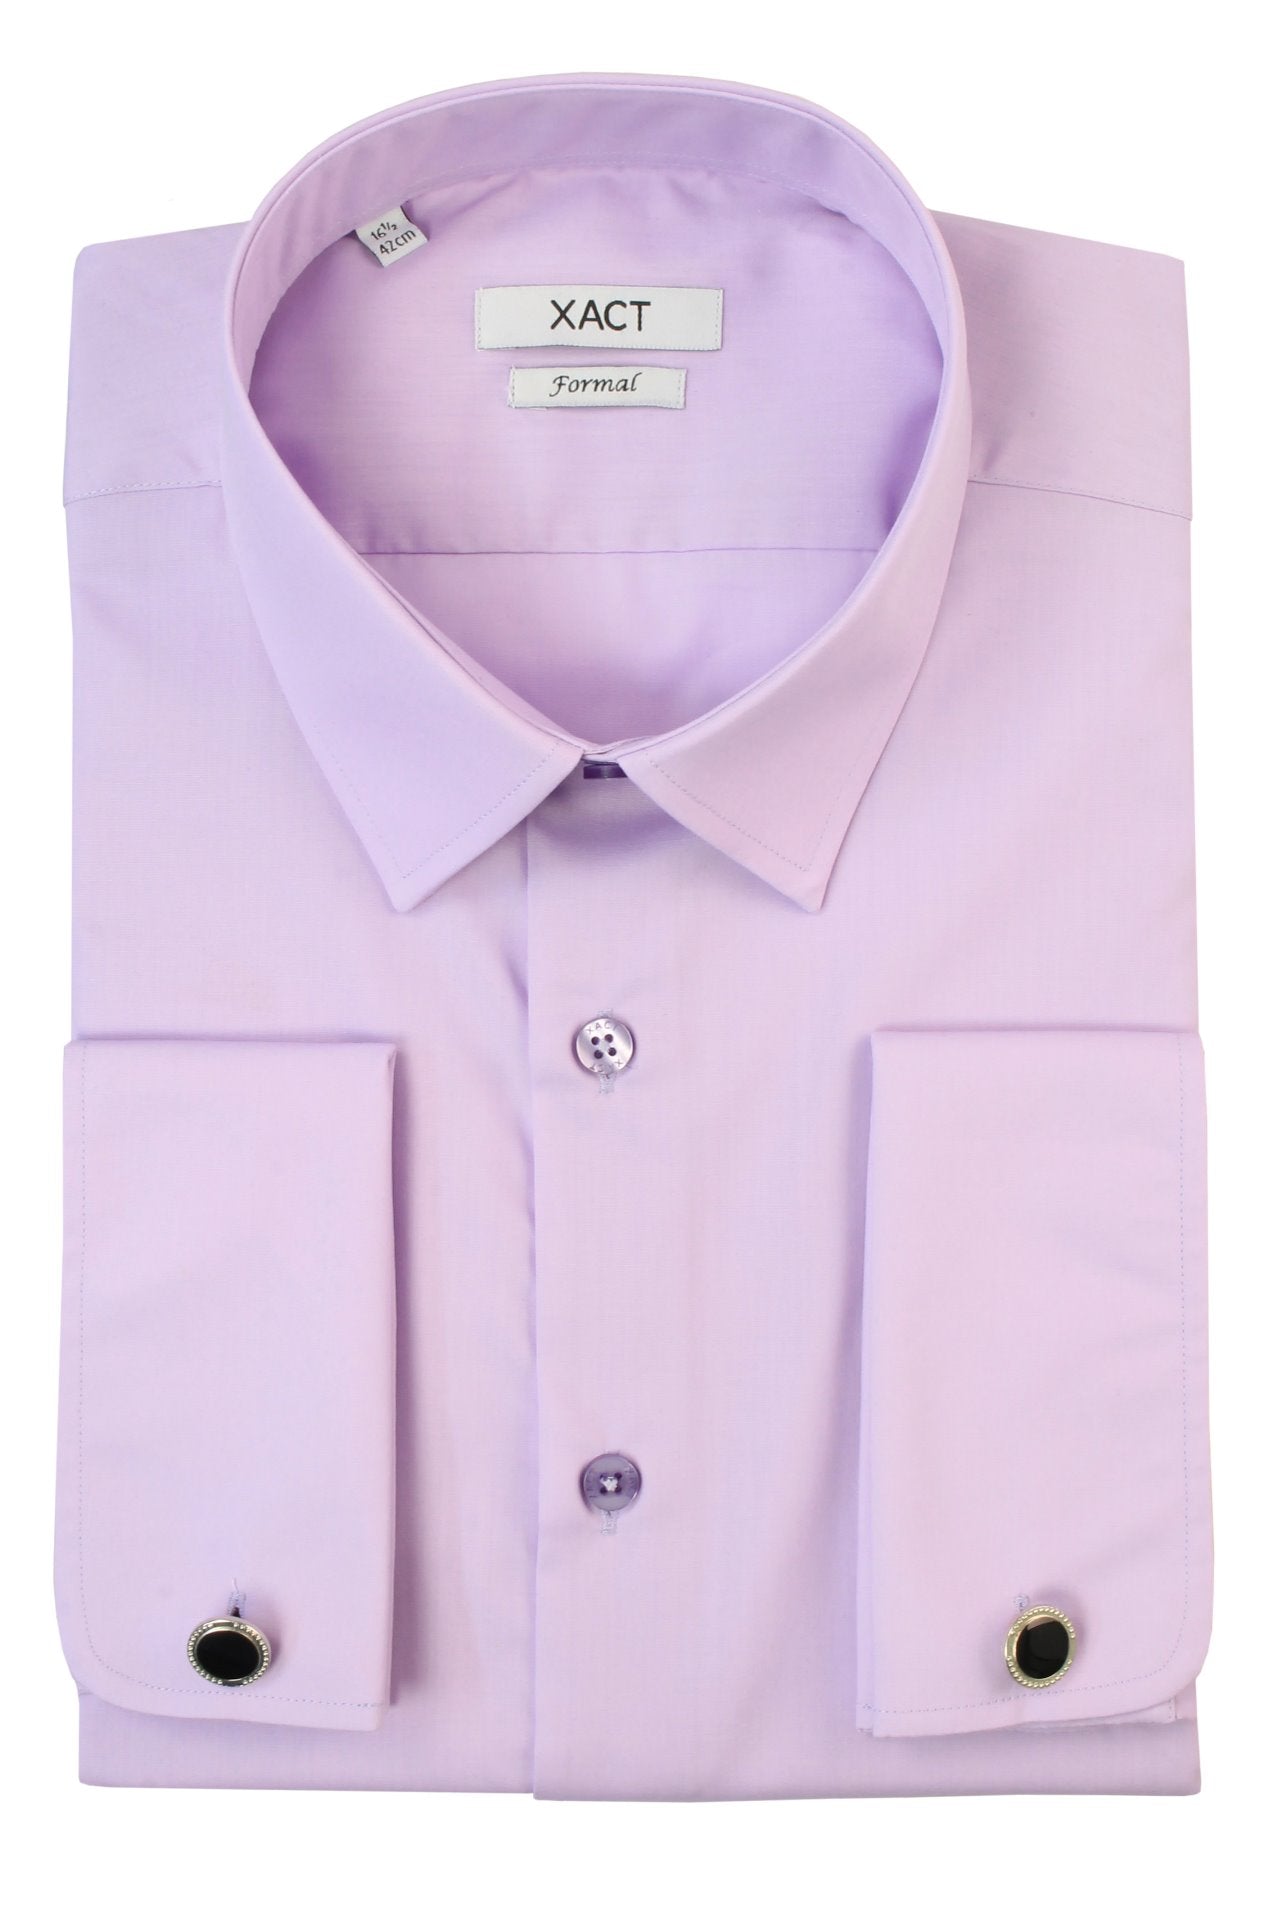 Xact Men's Plain Poplin Formal Shirt with Double/ French Cuff and Cuff Links-Main Image